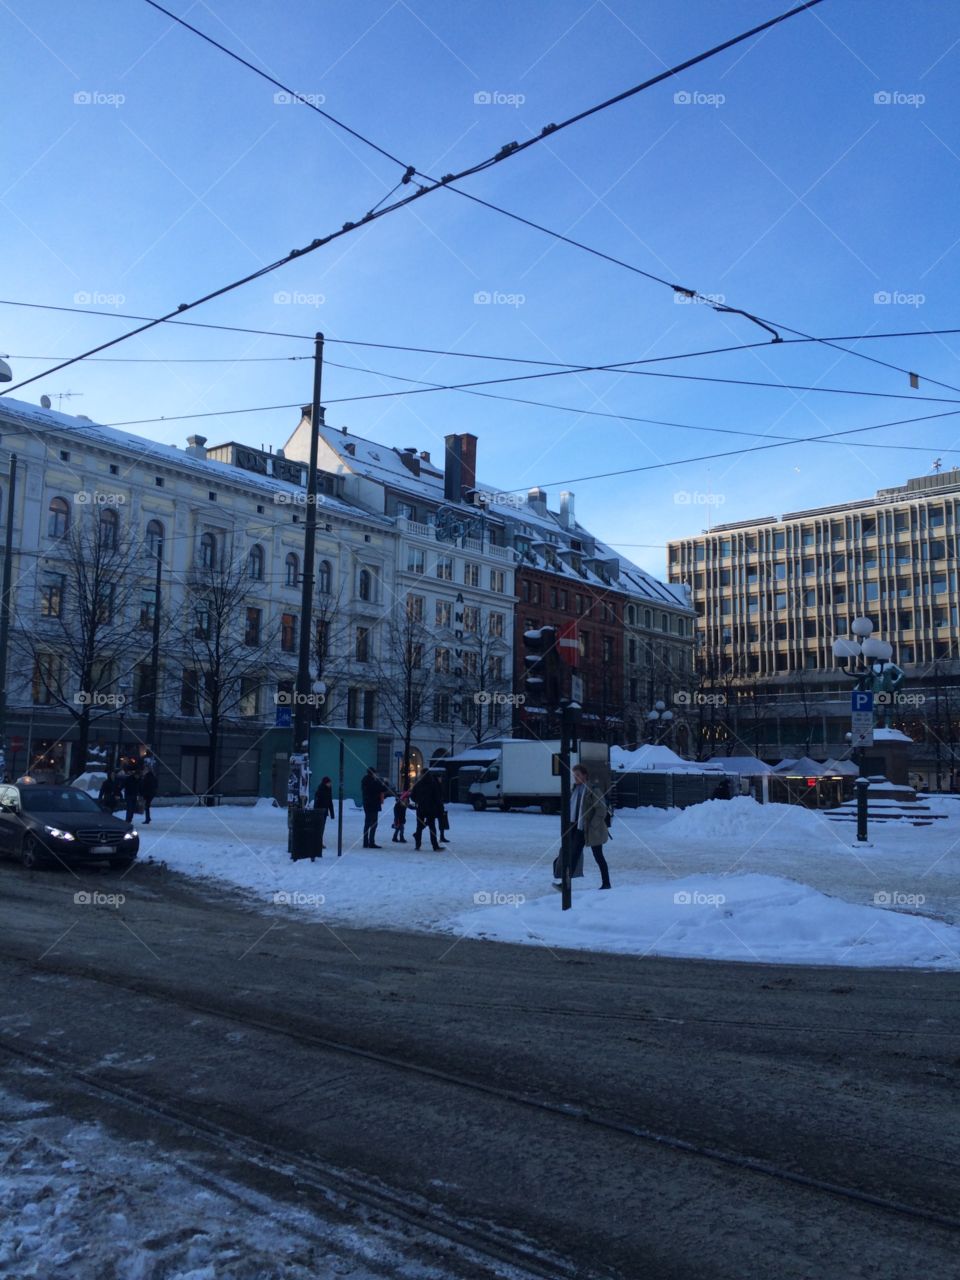 A square in Oslo, Norway